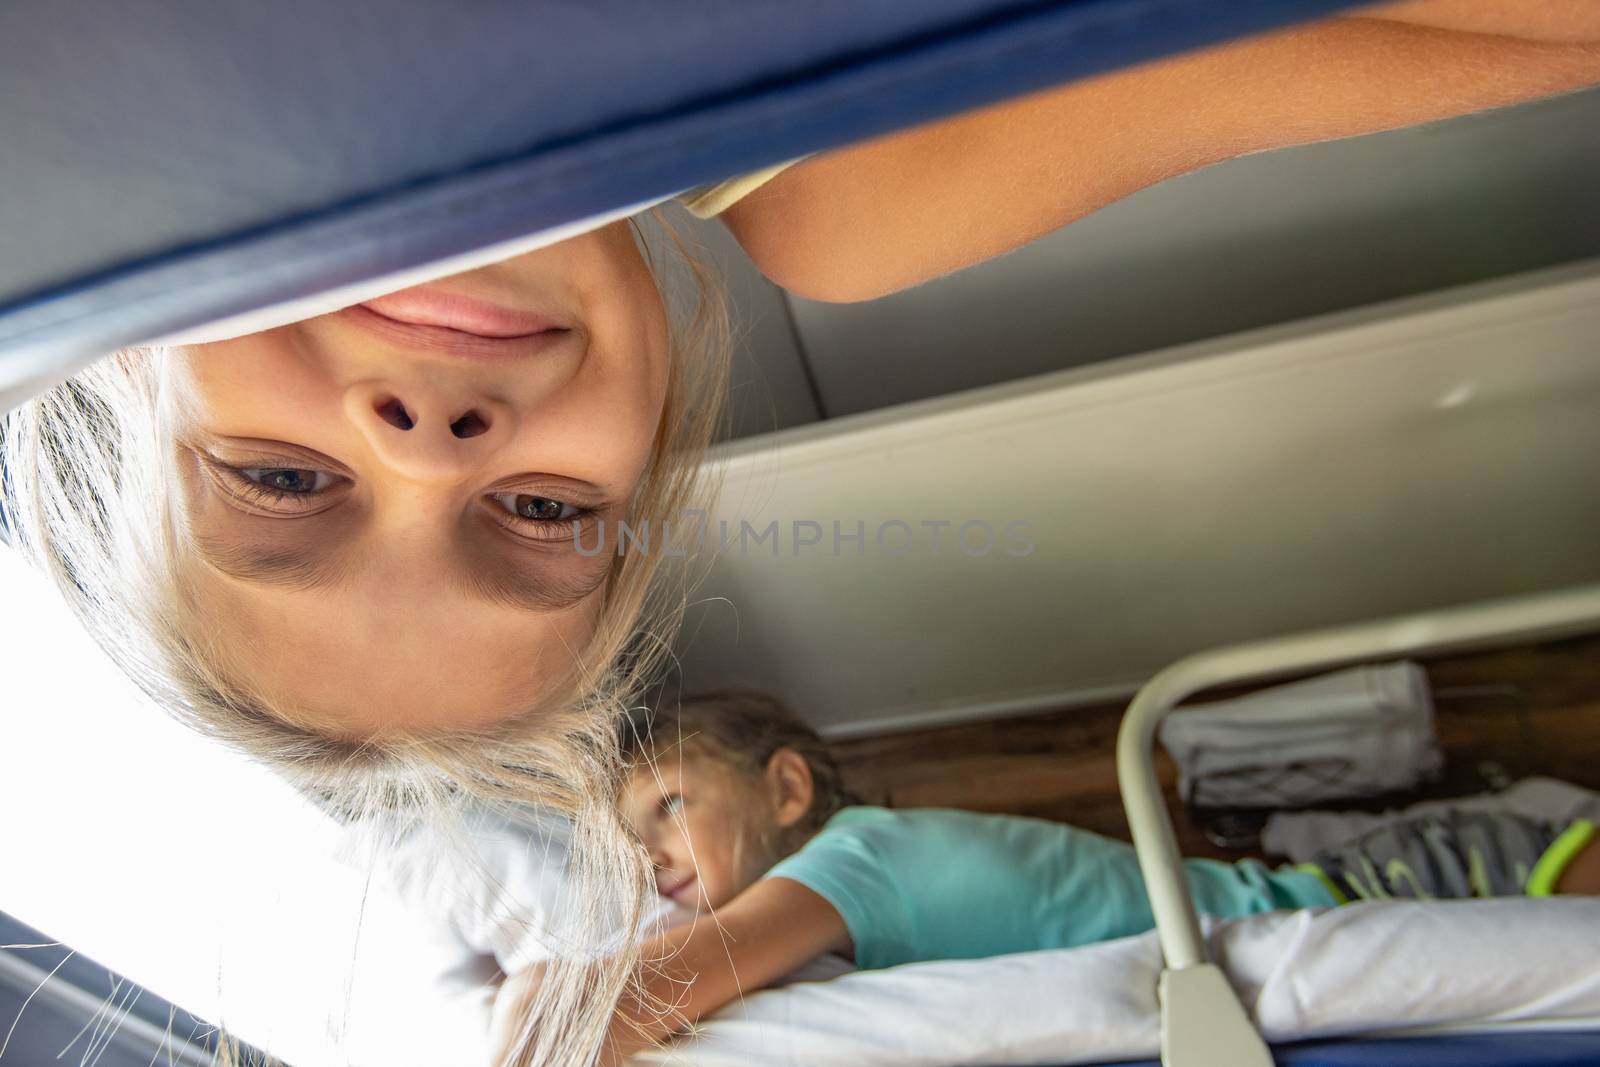 A girl hanging from the top shelf in a train looks into the frame